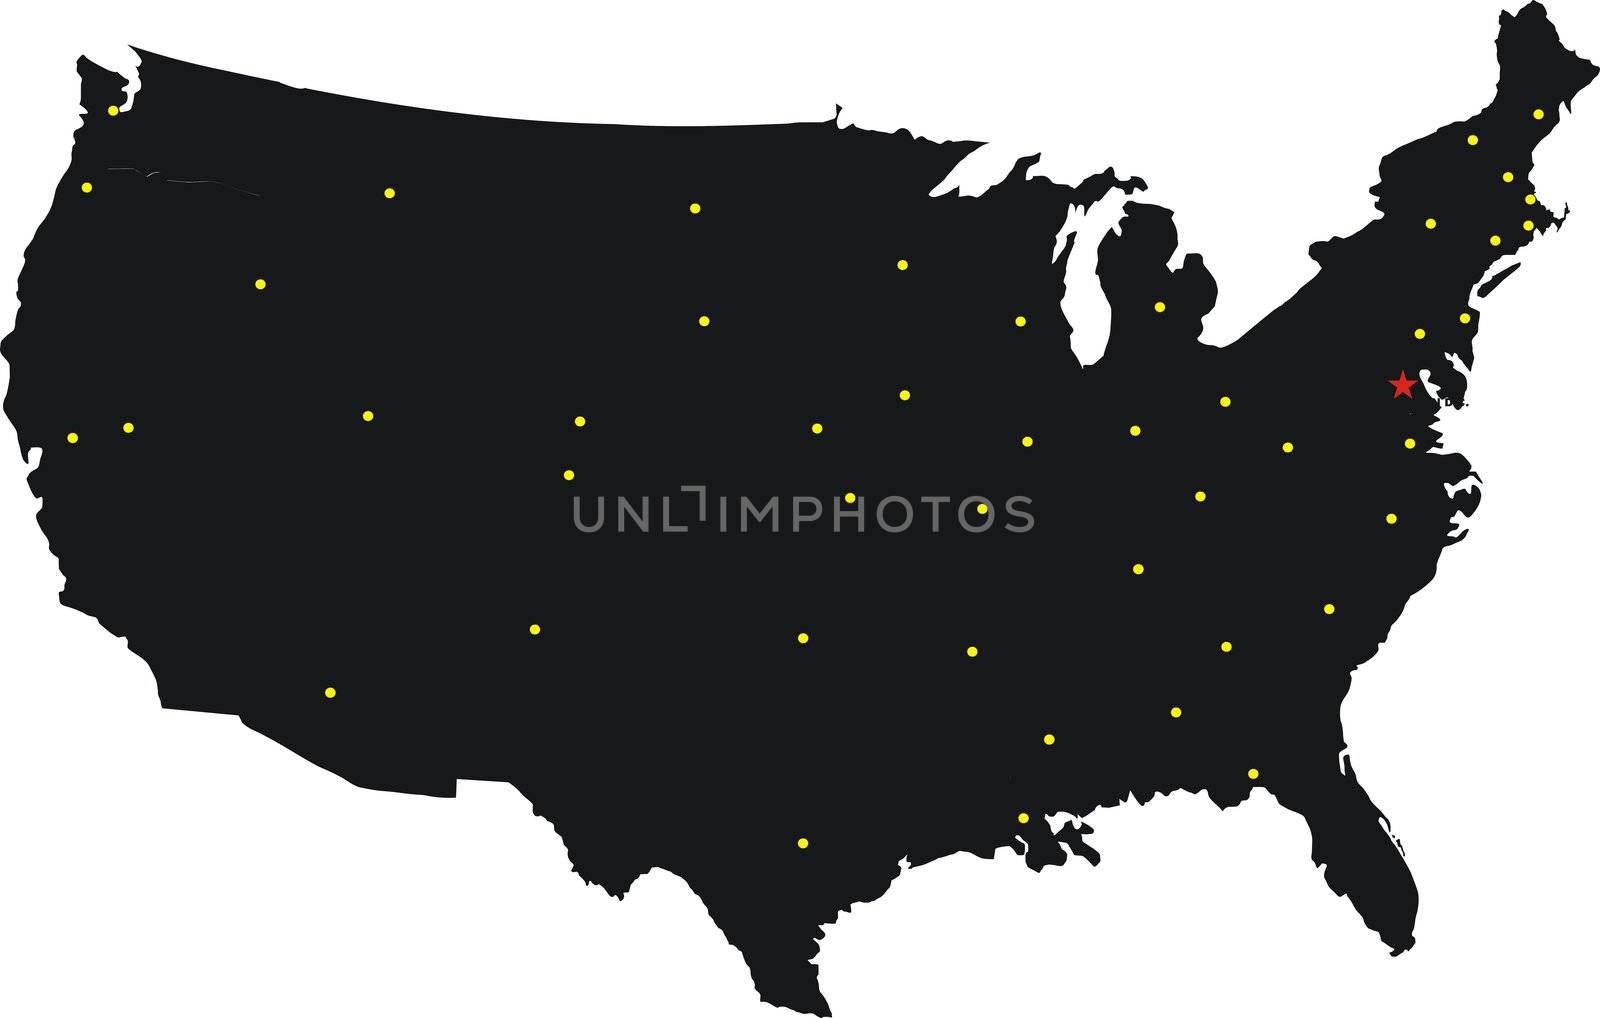 Black map of United States of America on the white background